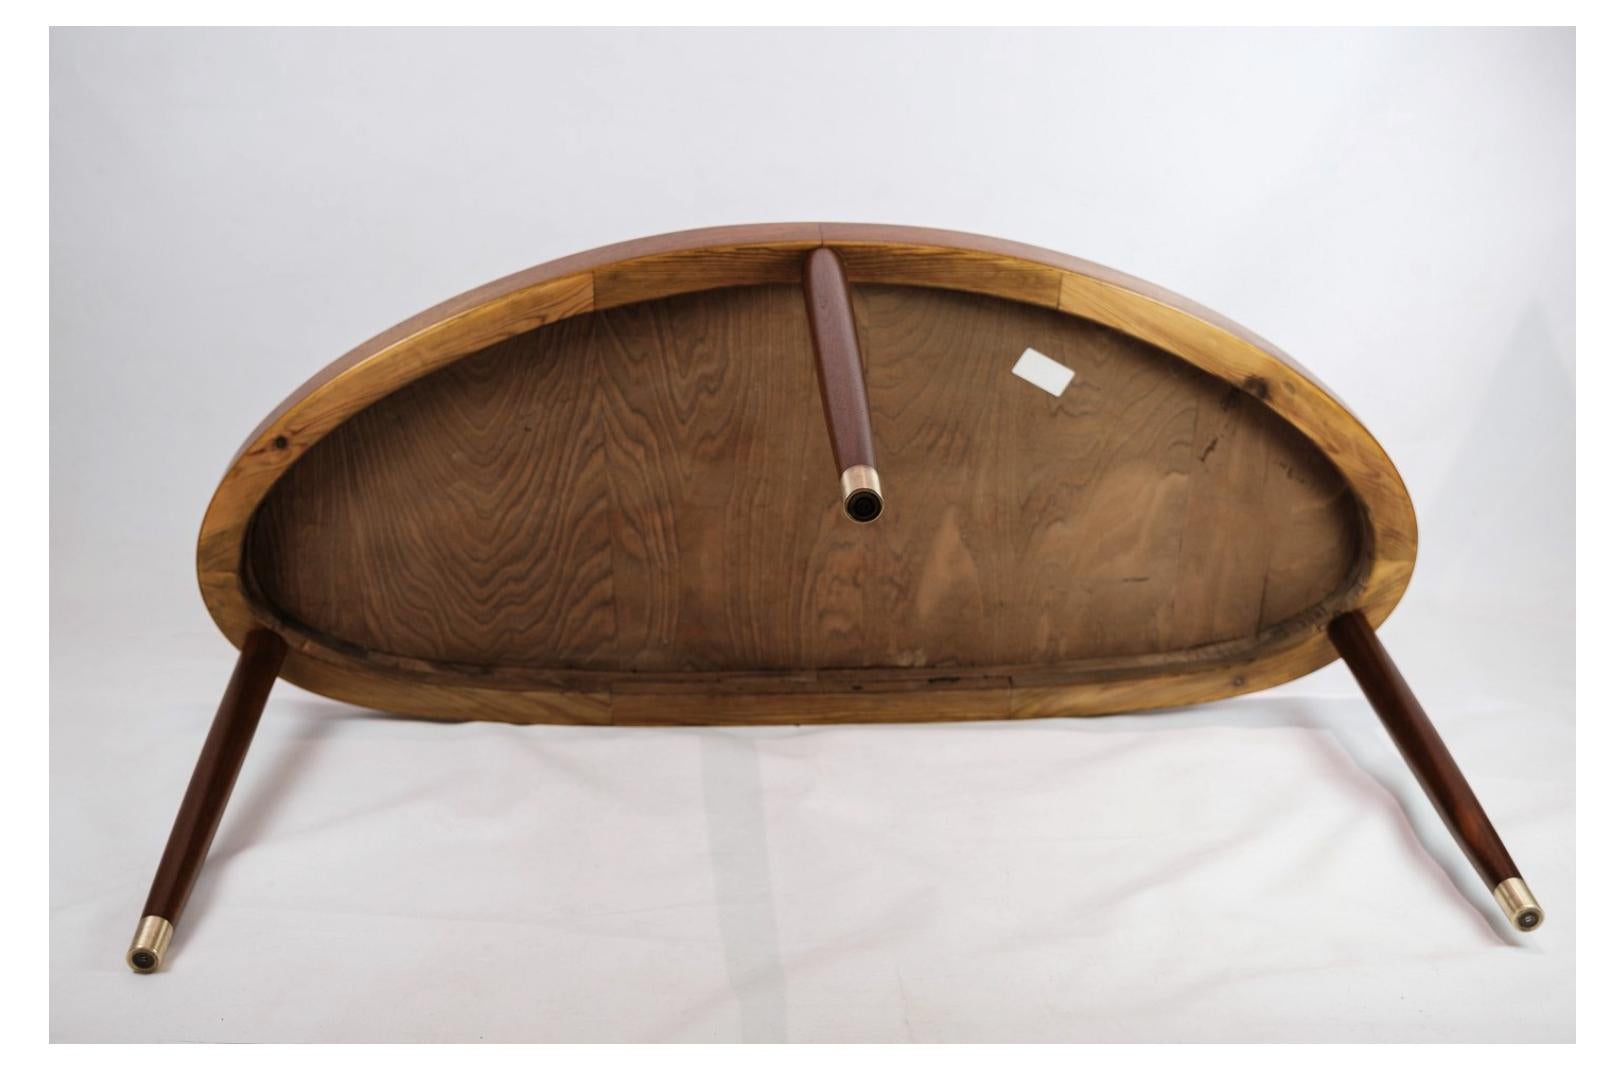 Coffee Table with Glass Top by Danish Master Carpenter in Walnut around 1940s For Sale 4